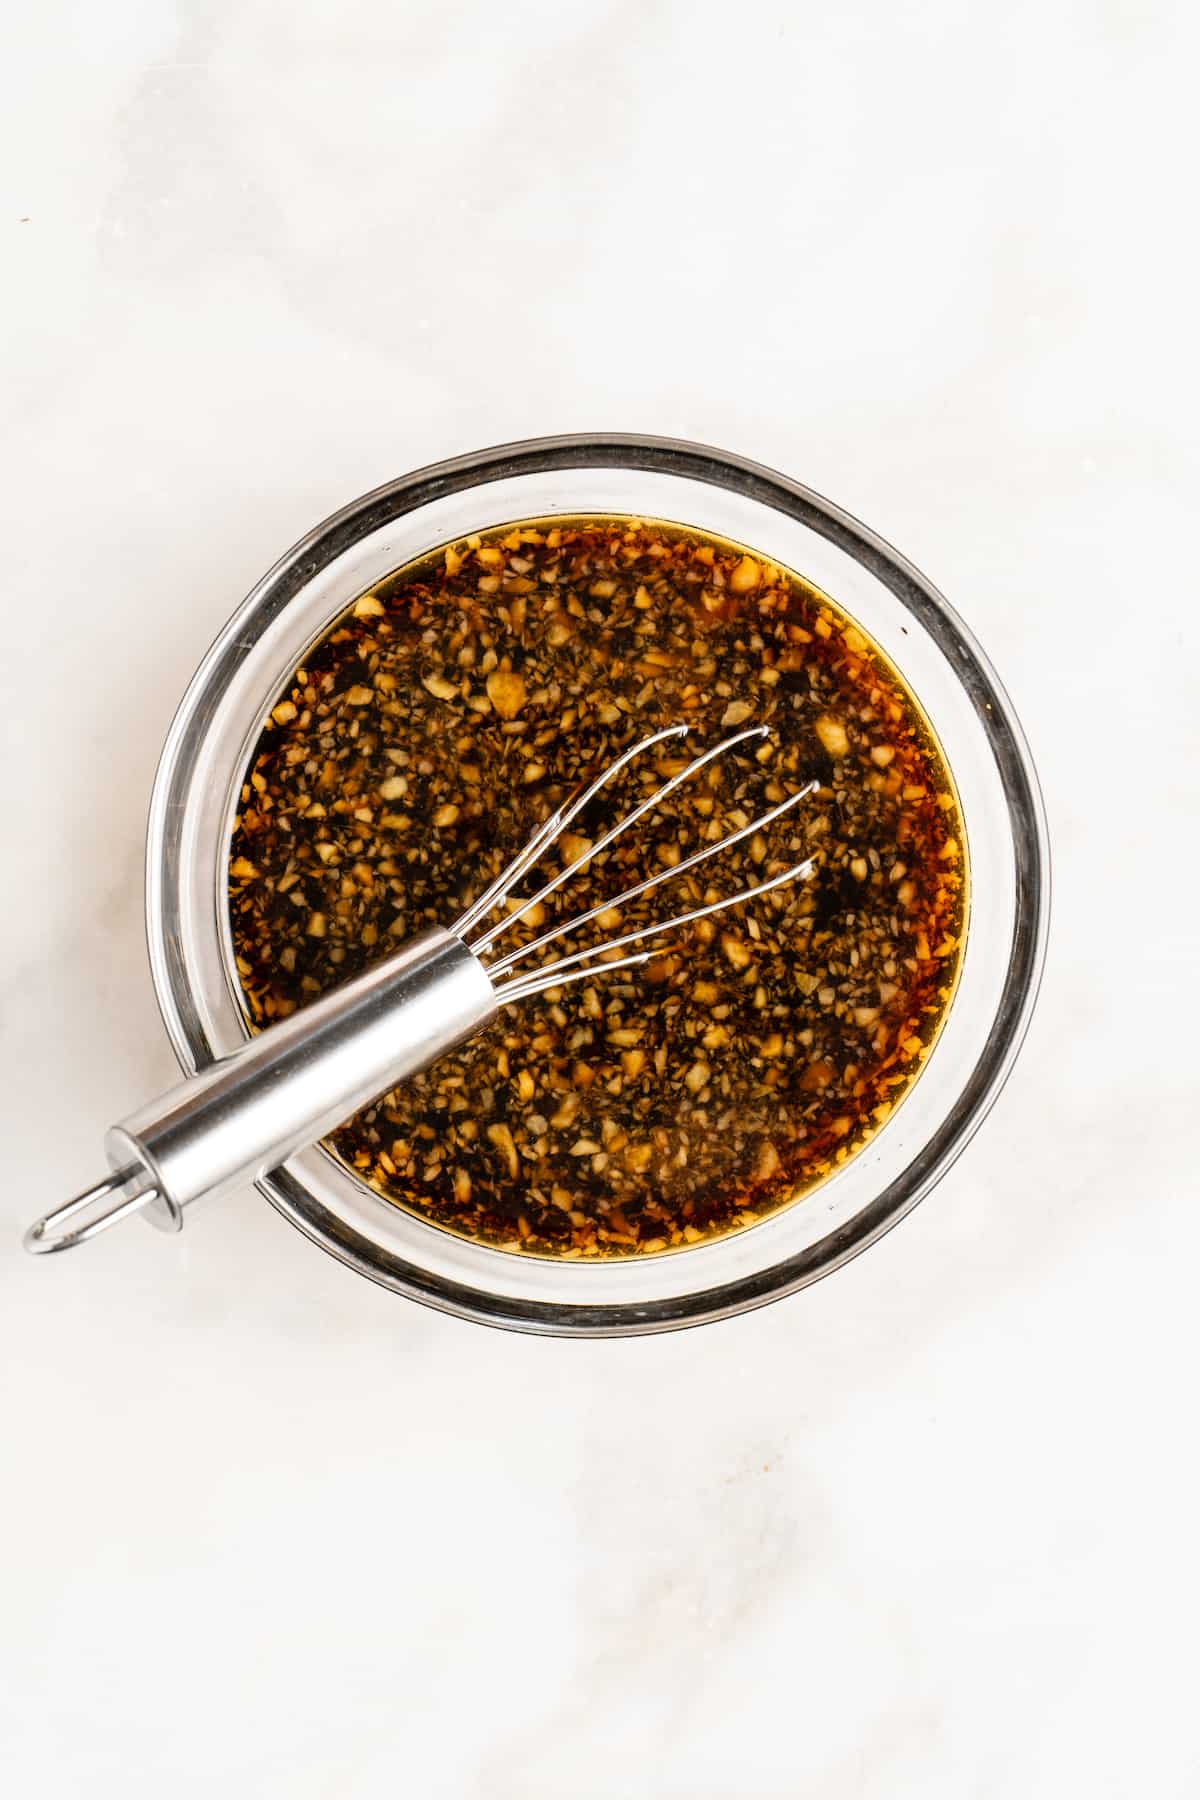 Overhead view of stir fry sauce in glass bowl with whisk